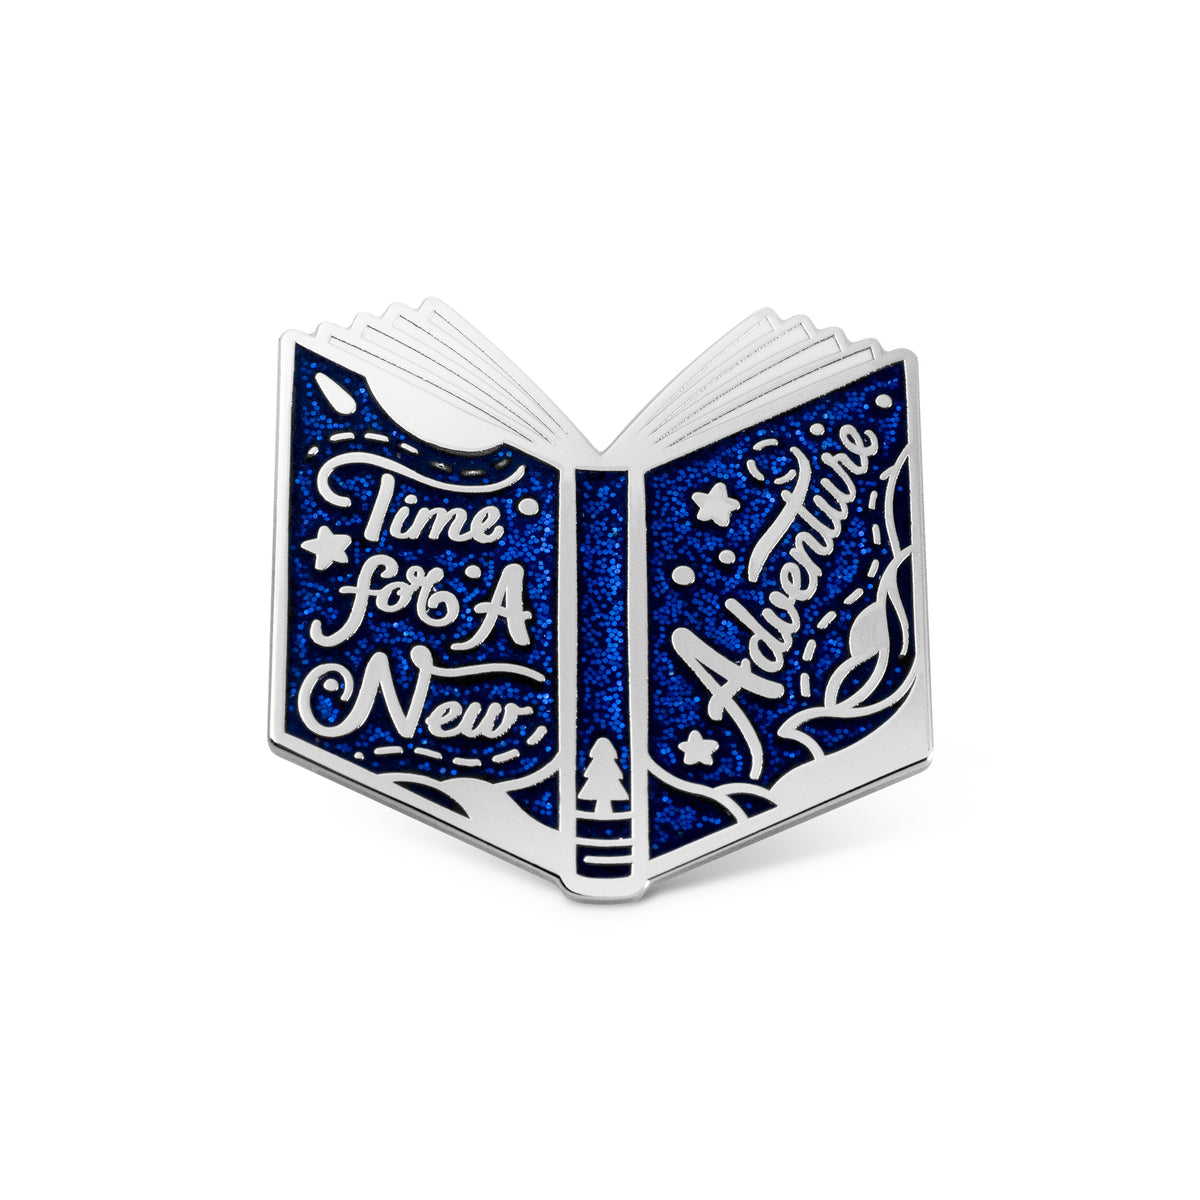 Time For a New Adventure Book Hard Enamel Lapel Pin – Winks For Days